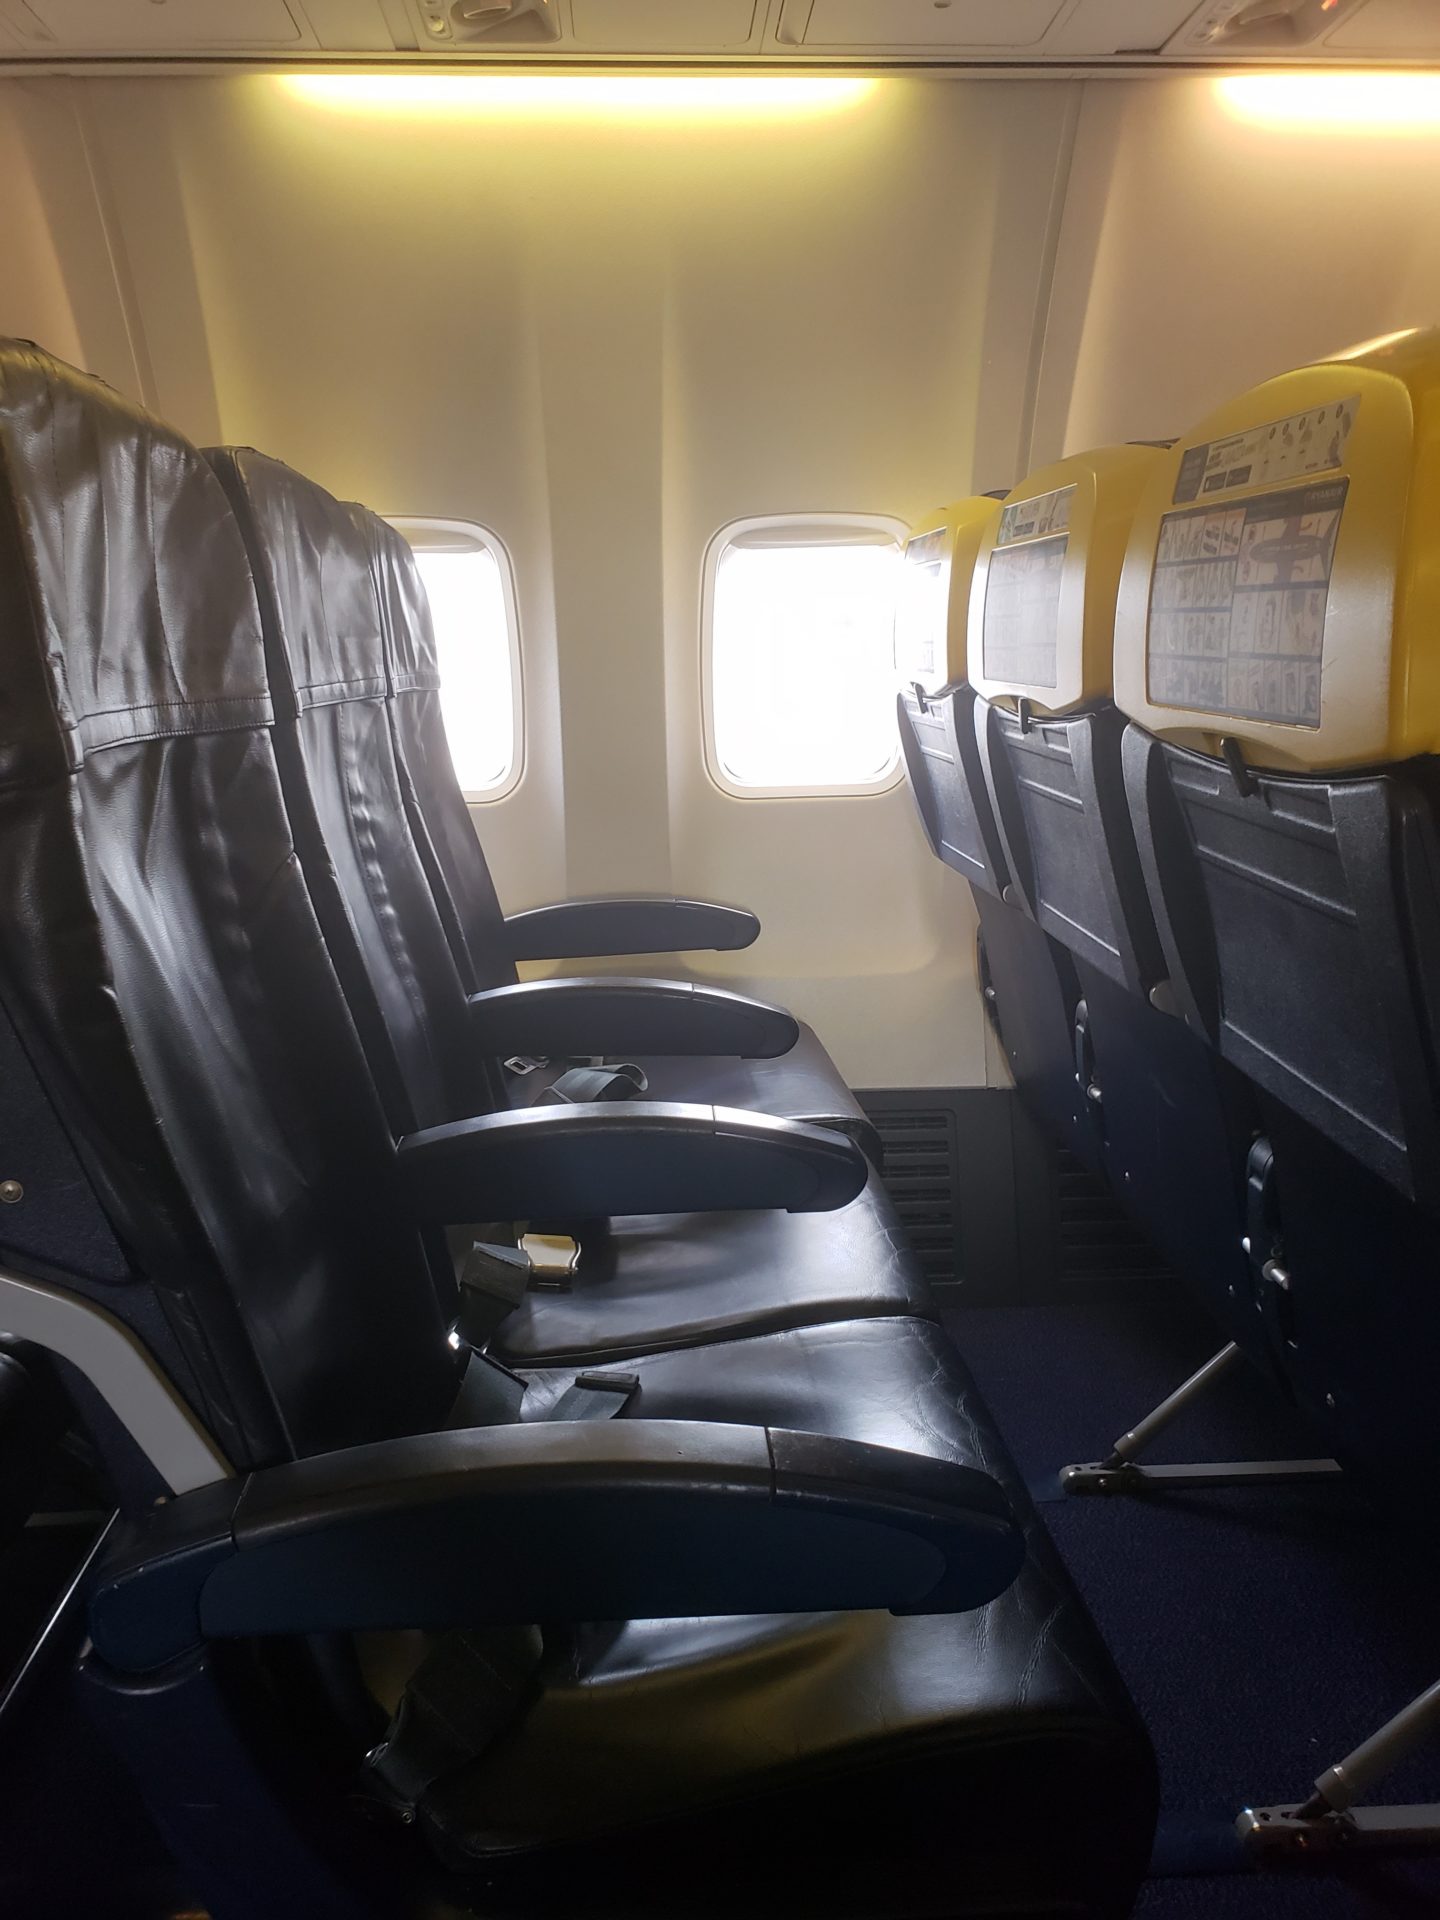 seats in an airplane with windows